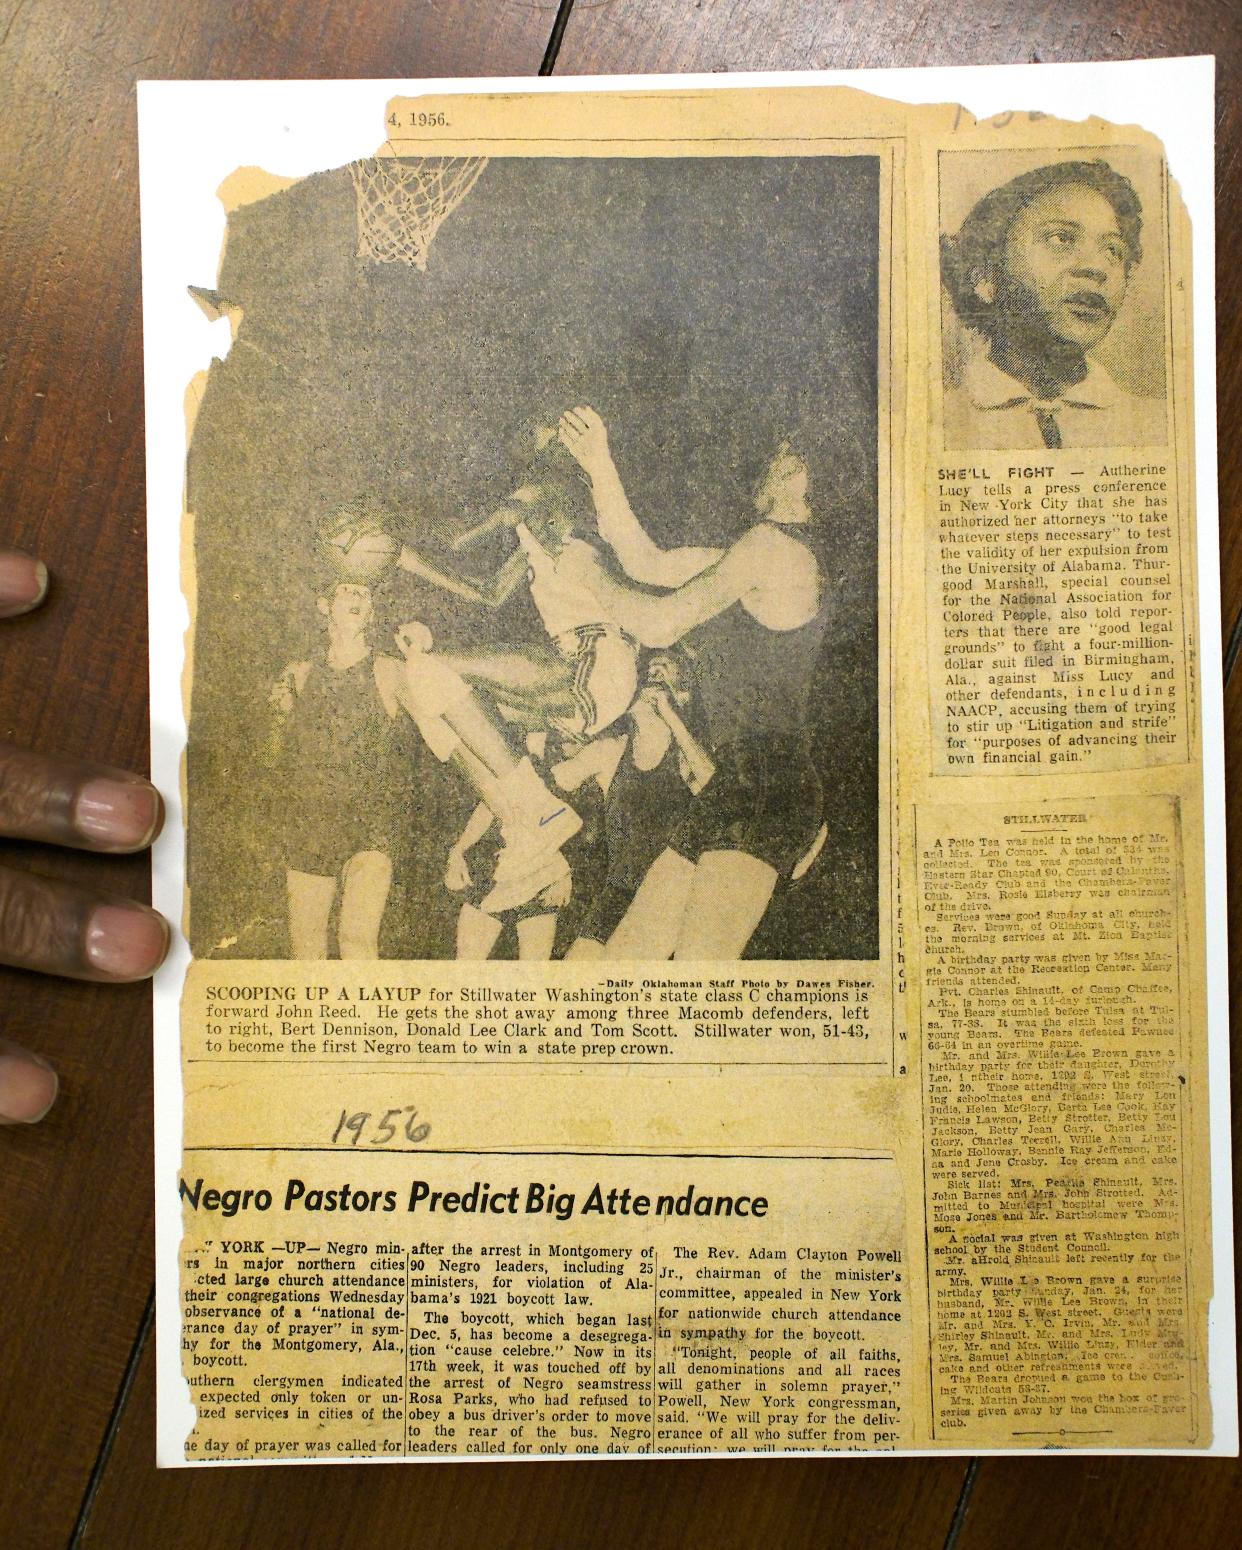 This image shows an action photo from Stillwater Booker T. Washington's 1956 championship game published in The Daily Oklahoman showing the Rev. John A. Reed going for a layup.